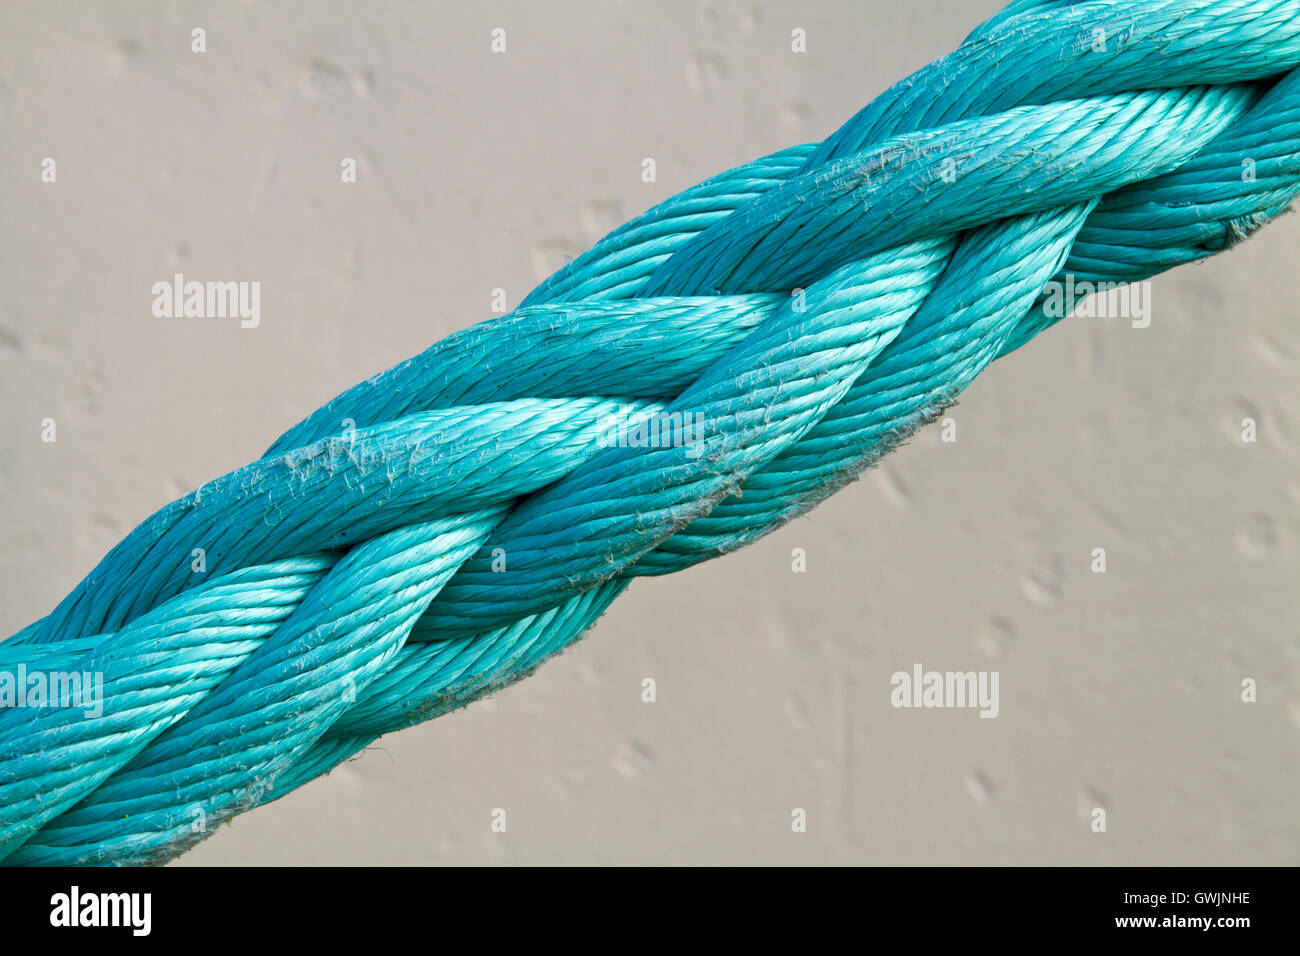 Close up of a blue slightly warn mooring rope under tension against a white background Stock Photo